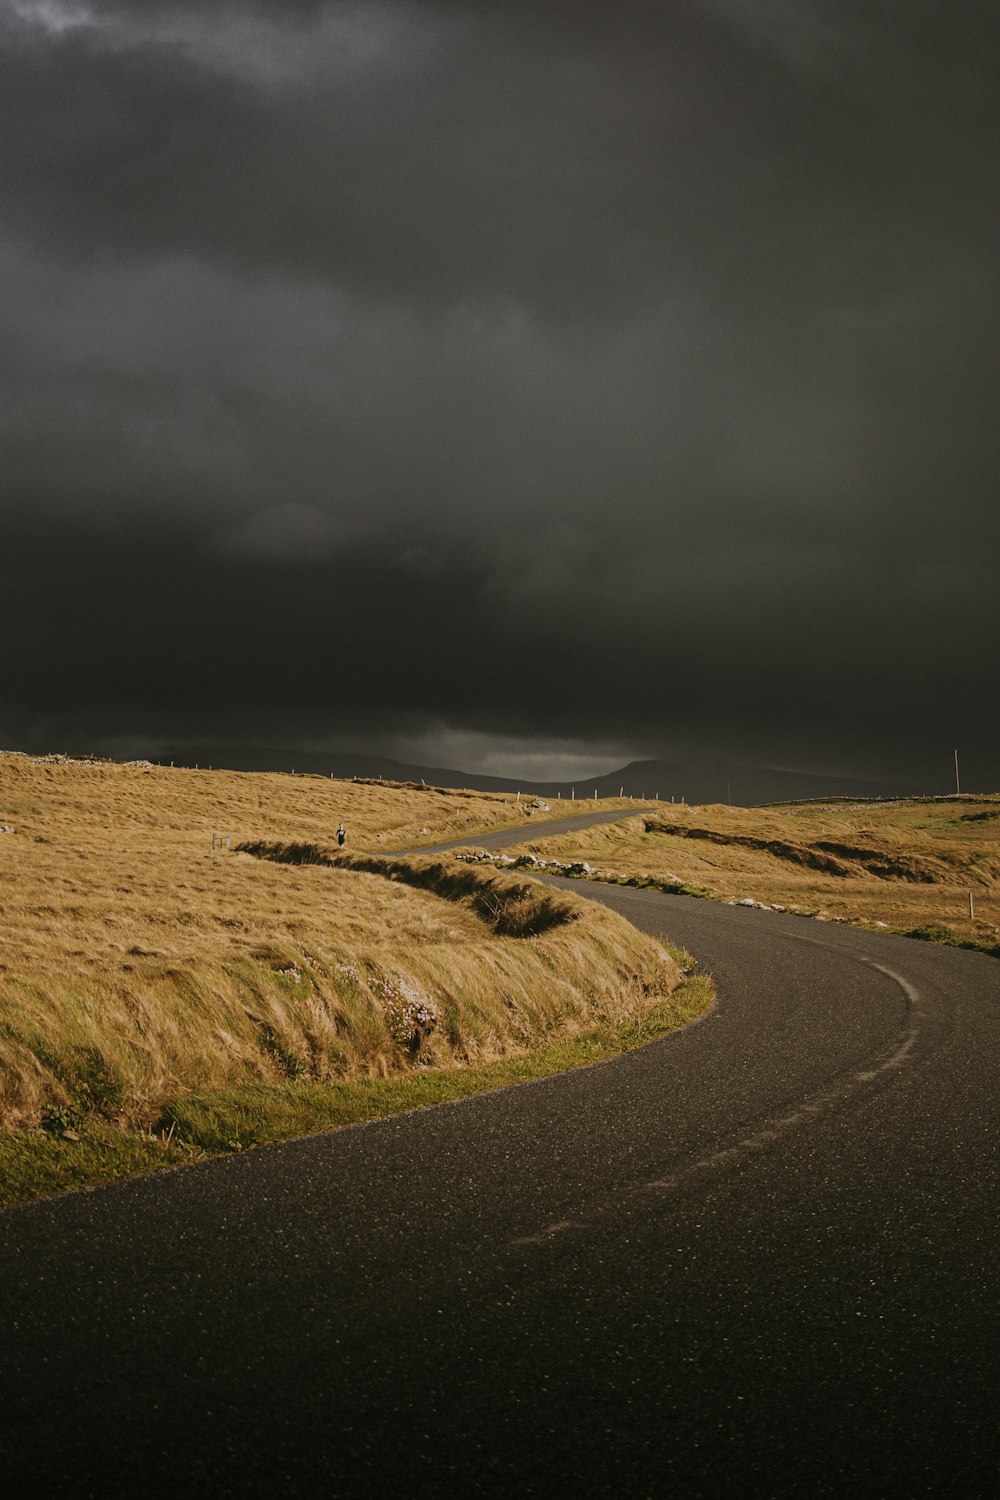 a winding road in the middle of a field under a dark sky